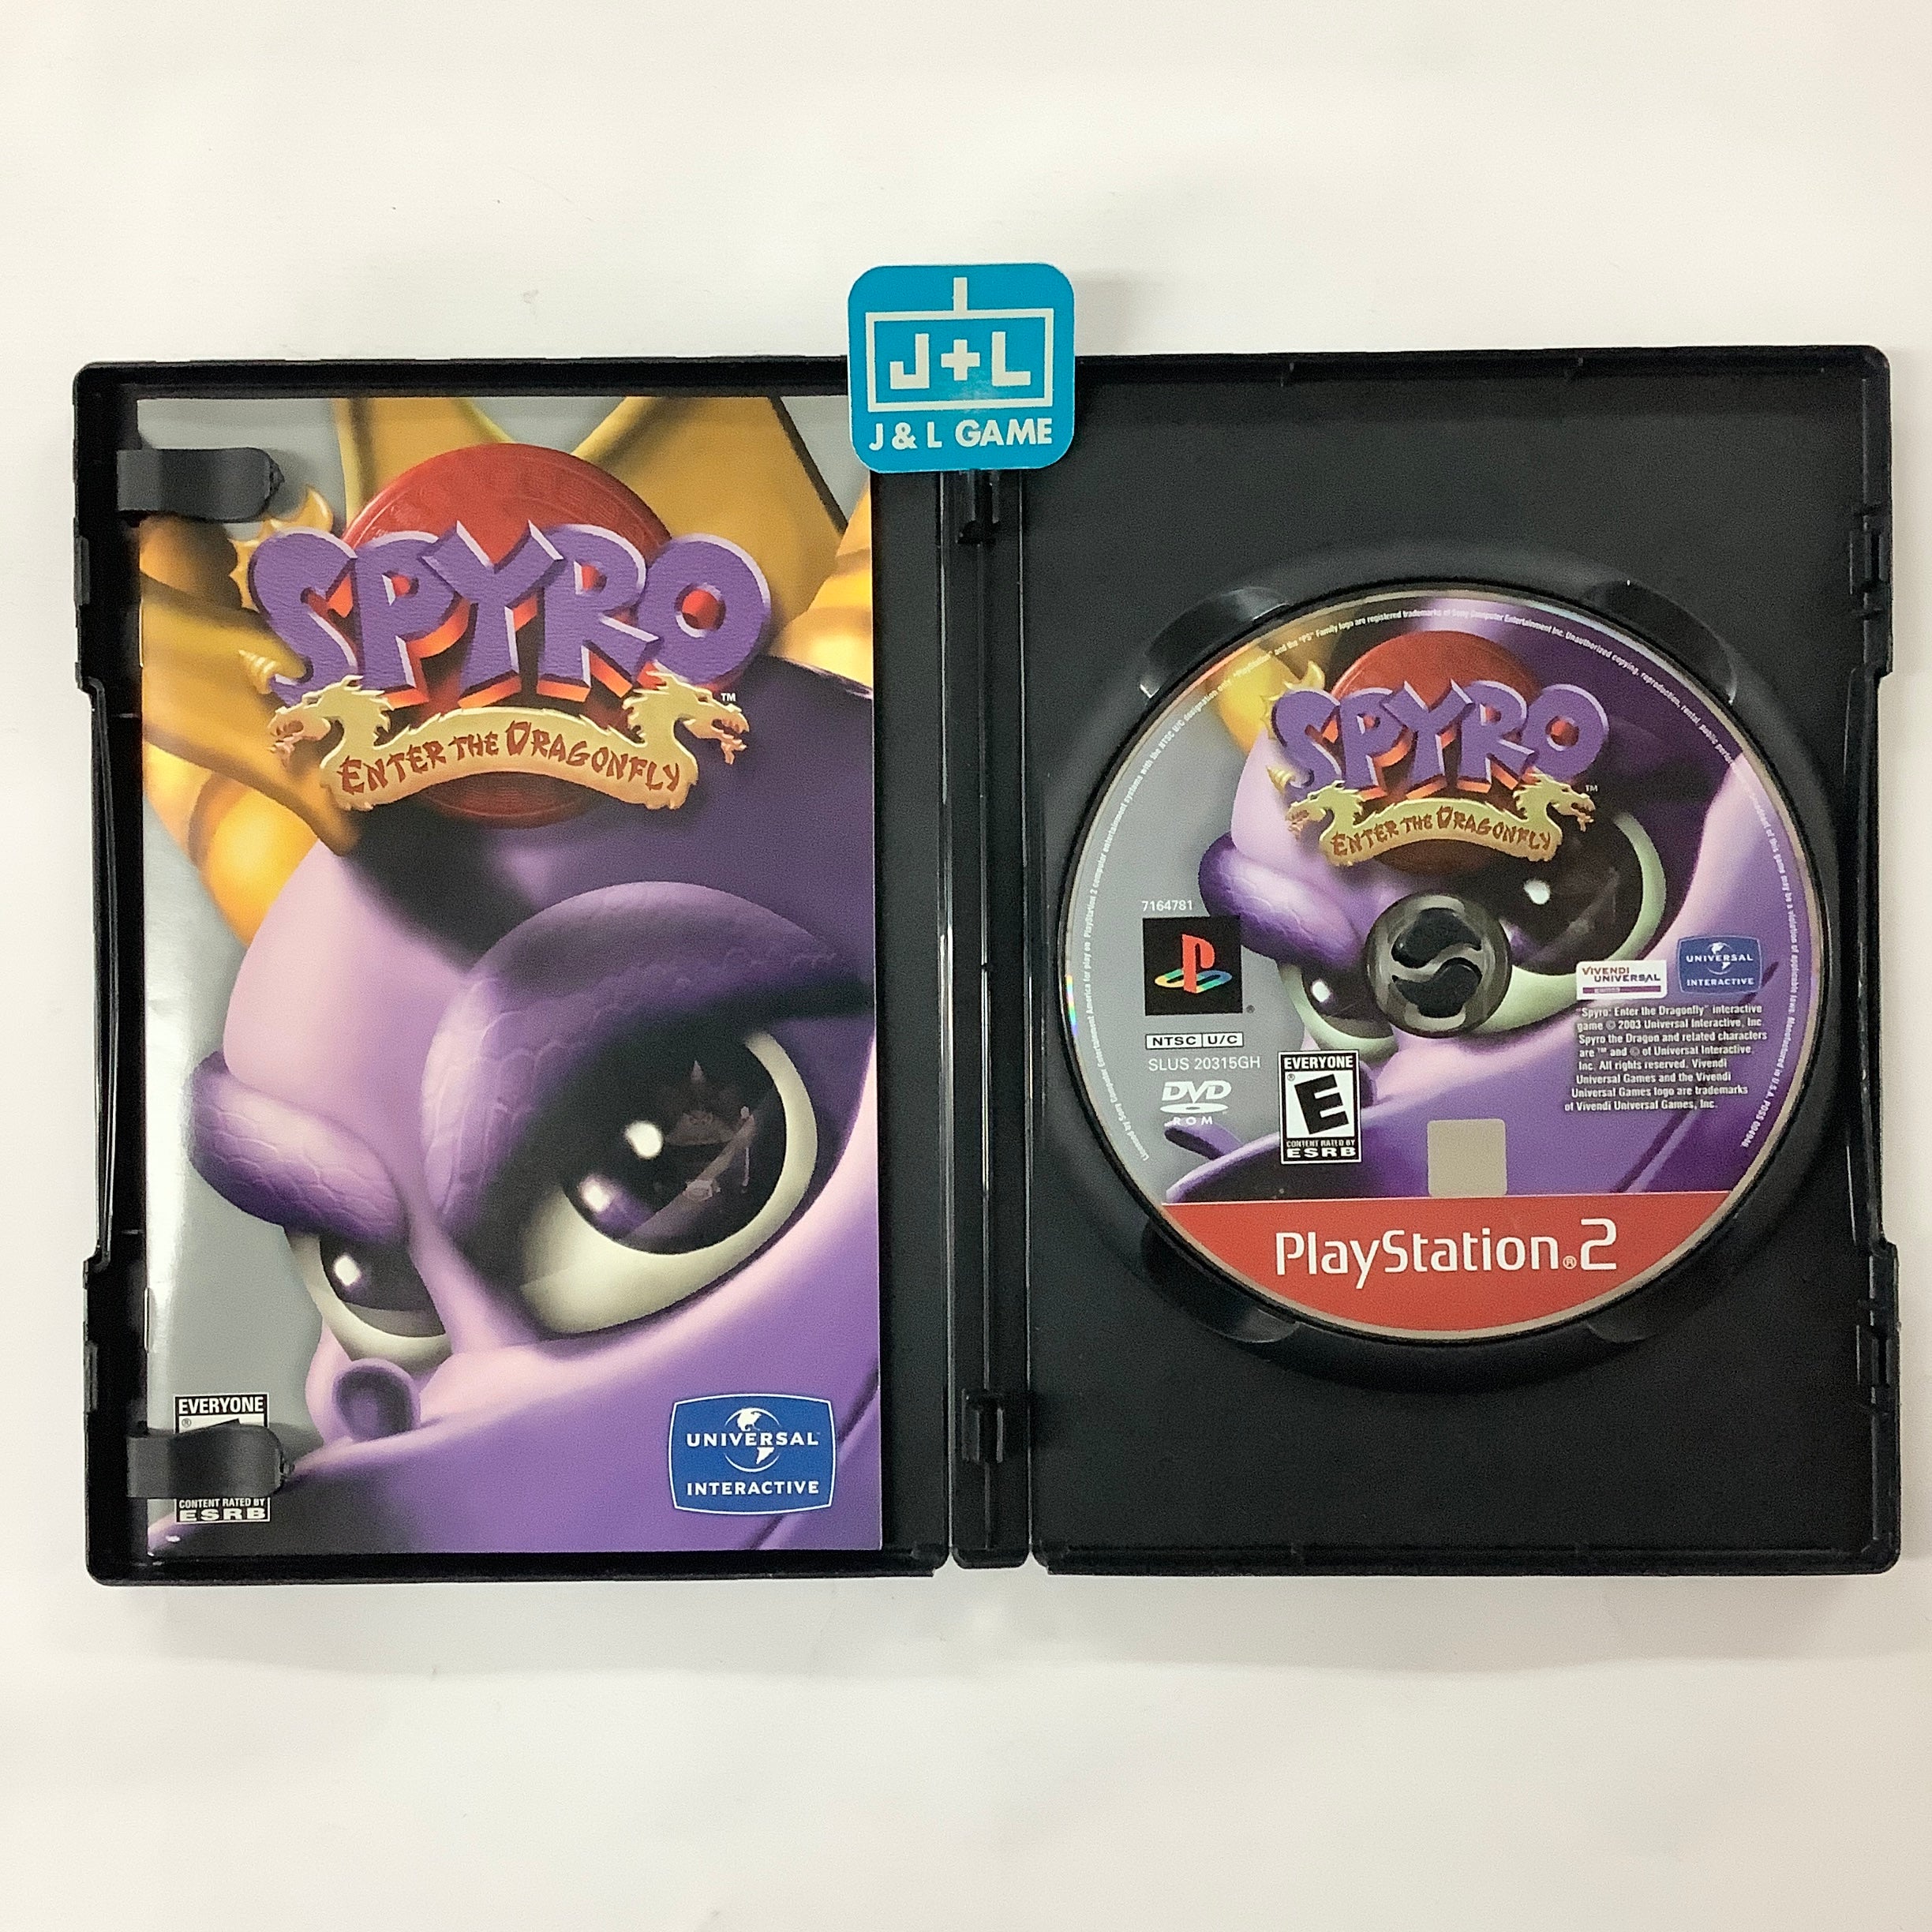 Spyro: Enter the Dragonfly (Greatest Hits) - (PS2) PlayStation 2 [Pre-Owned] Video Games Universal Interactive   